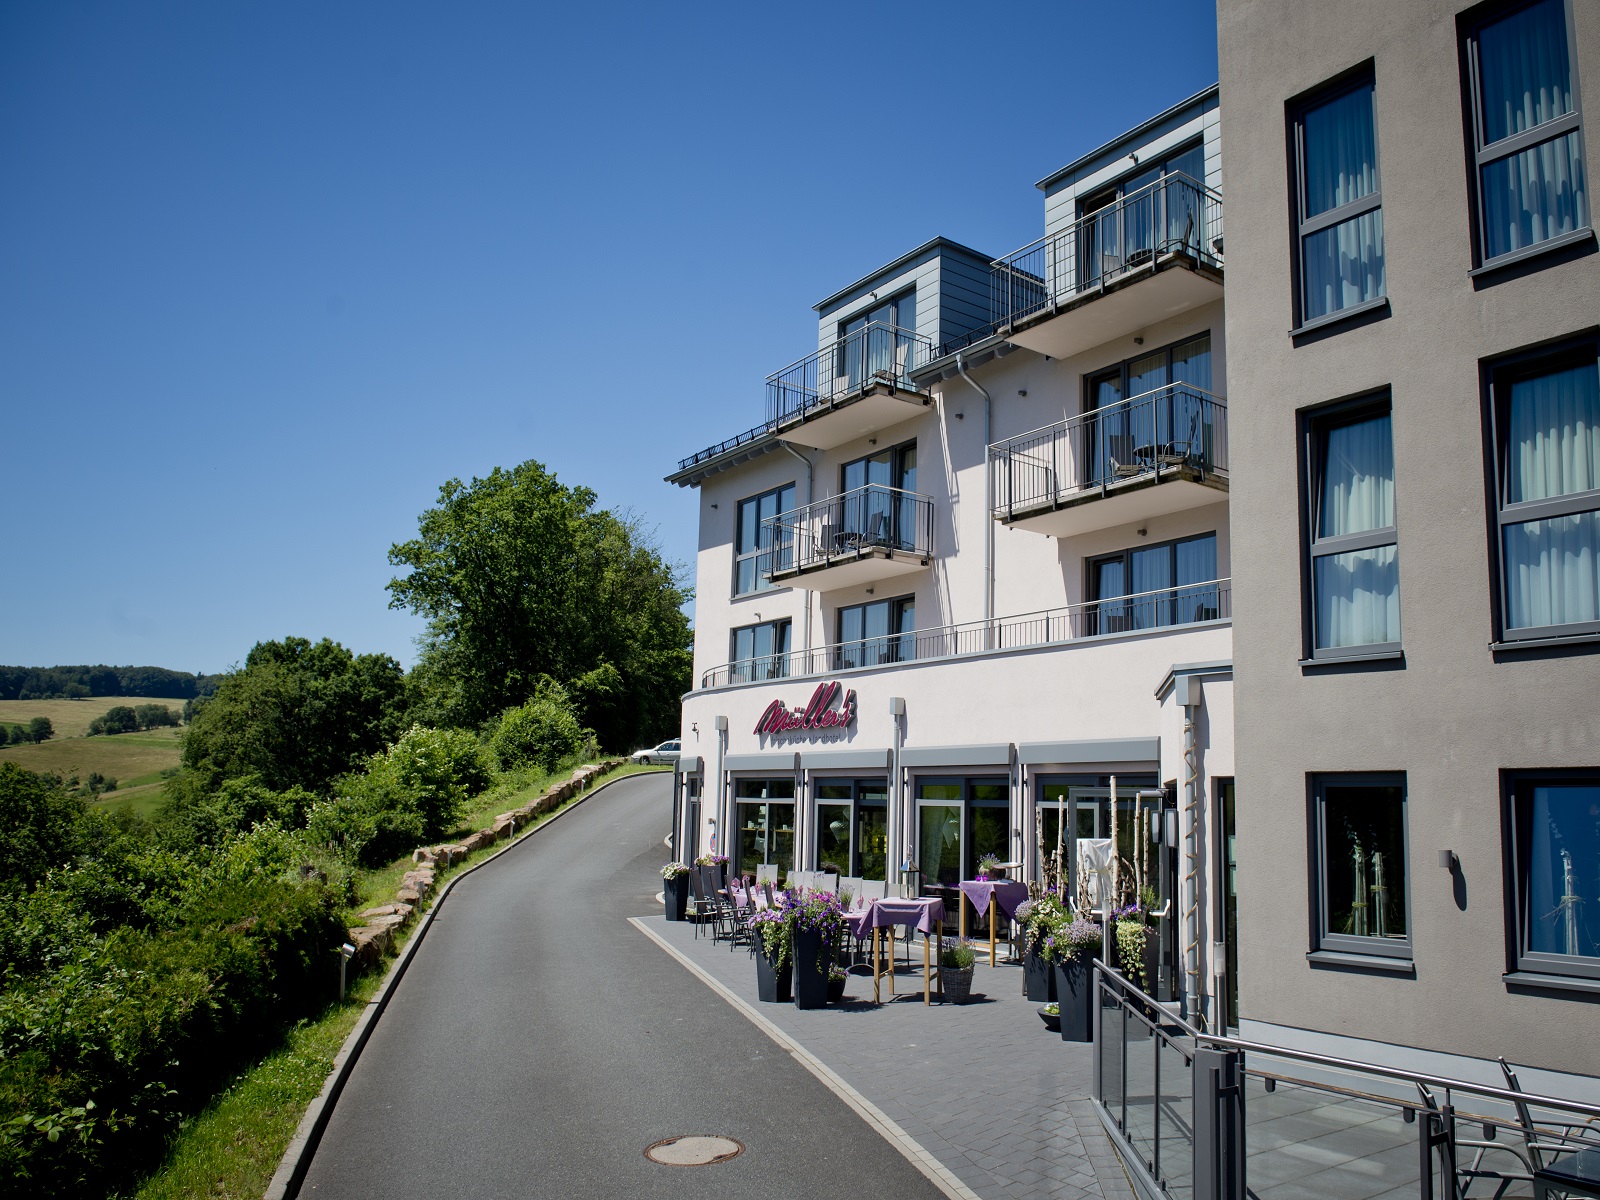 Müller´s Landhotel <br/>99.00 ew <br/> <a href='http://vakantieoplossing.nl/outpage/?id=cbcd3a7a045bcbd4339269313715cd4c' target='_blank'>View Details</a>